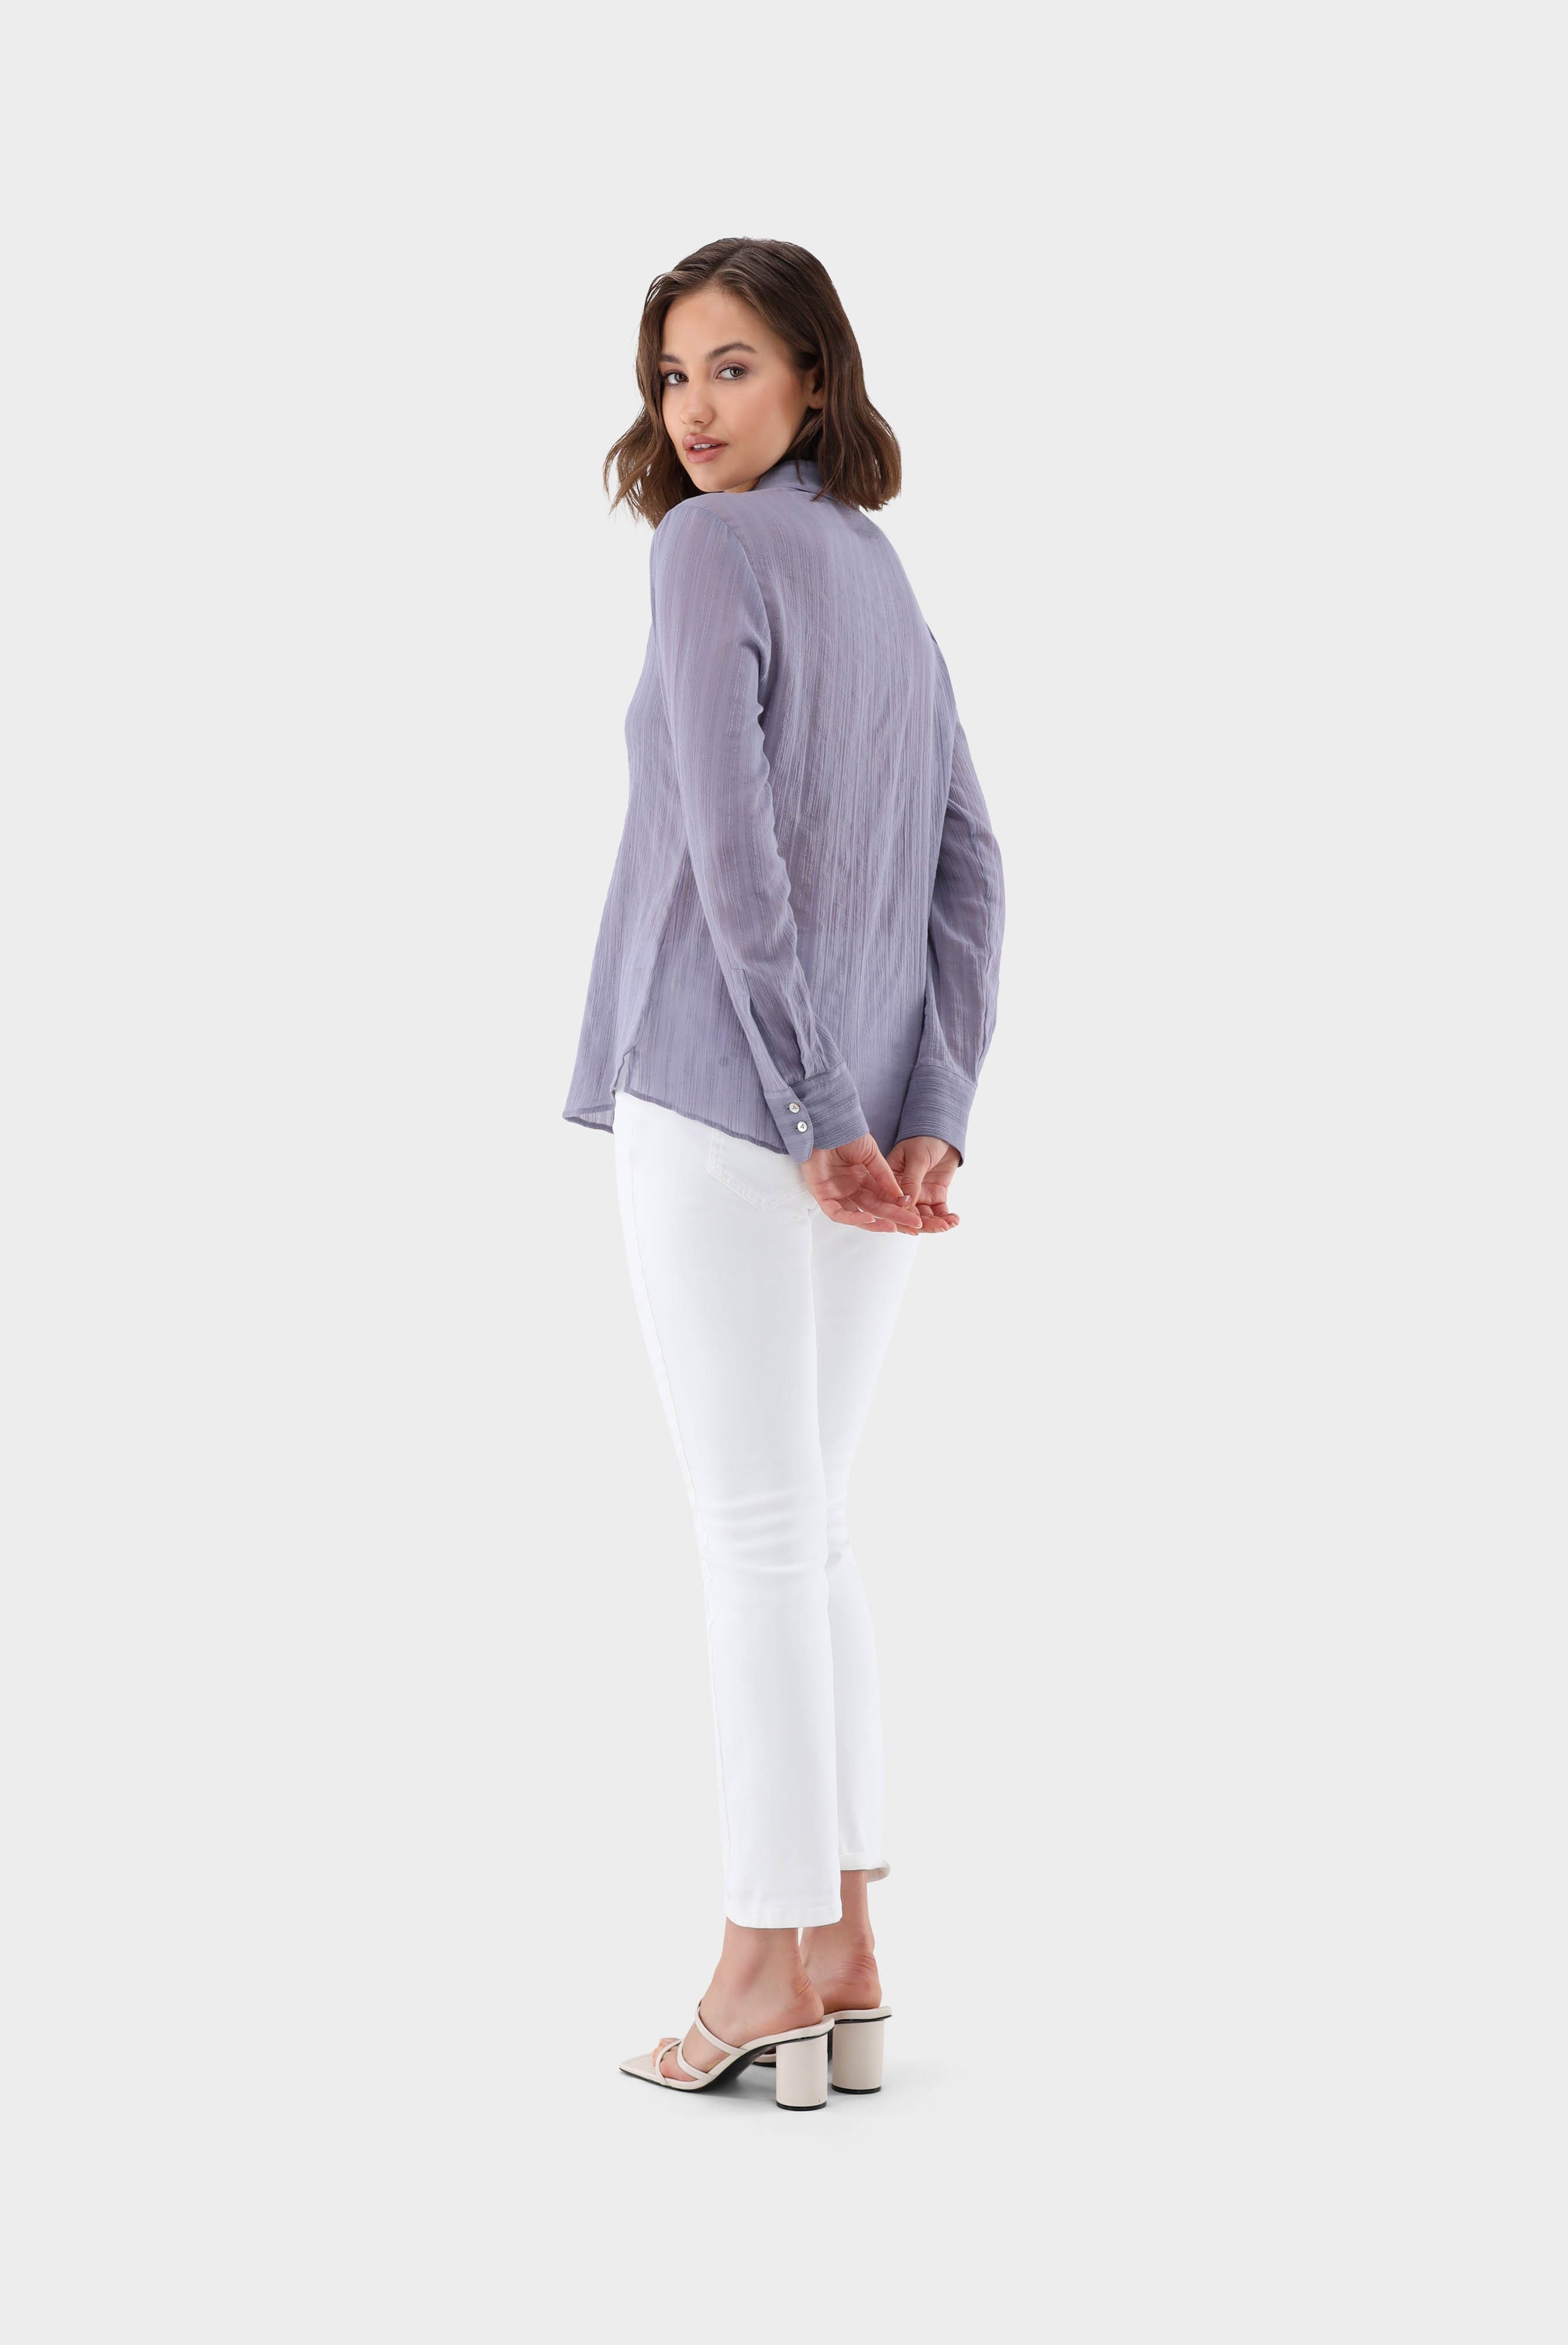 Casual Blouses+Fitted shirt blouse with jacquard stripes+05.511Z.07.151063.630.34